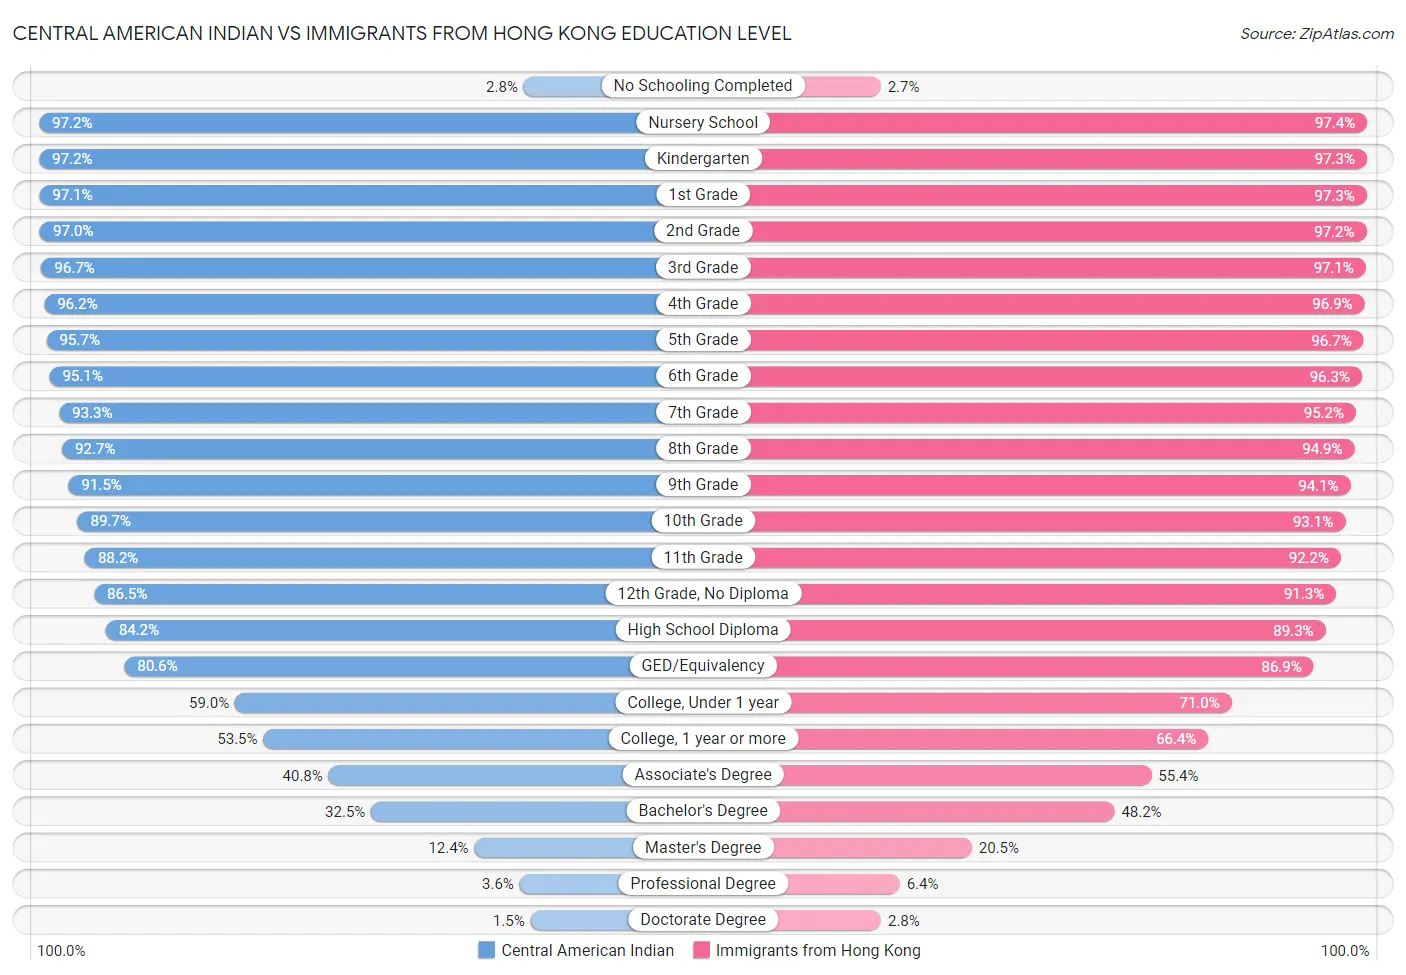 Central American Indian vs Immigrants from Hong Kong Education Level